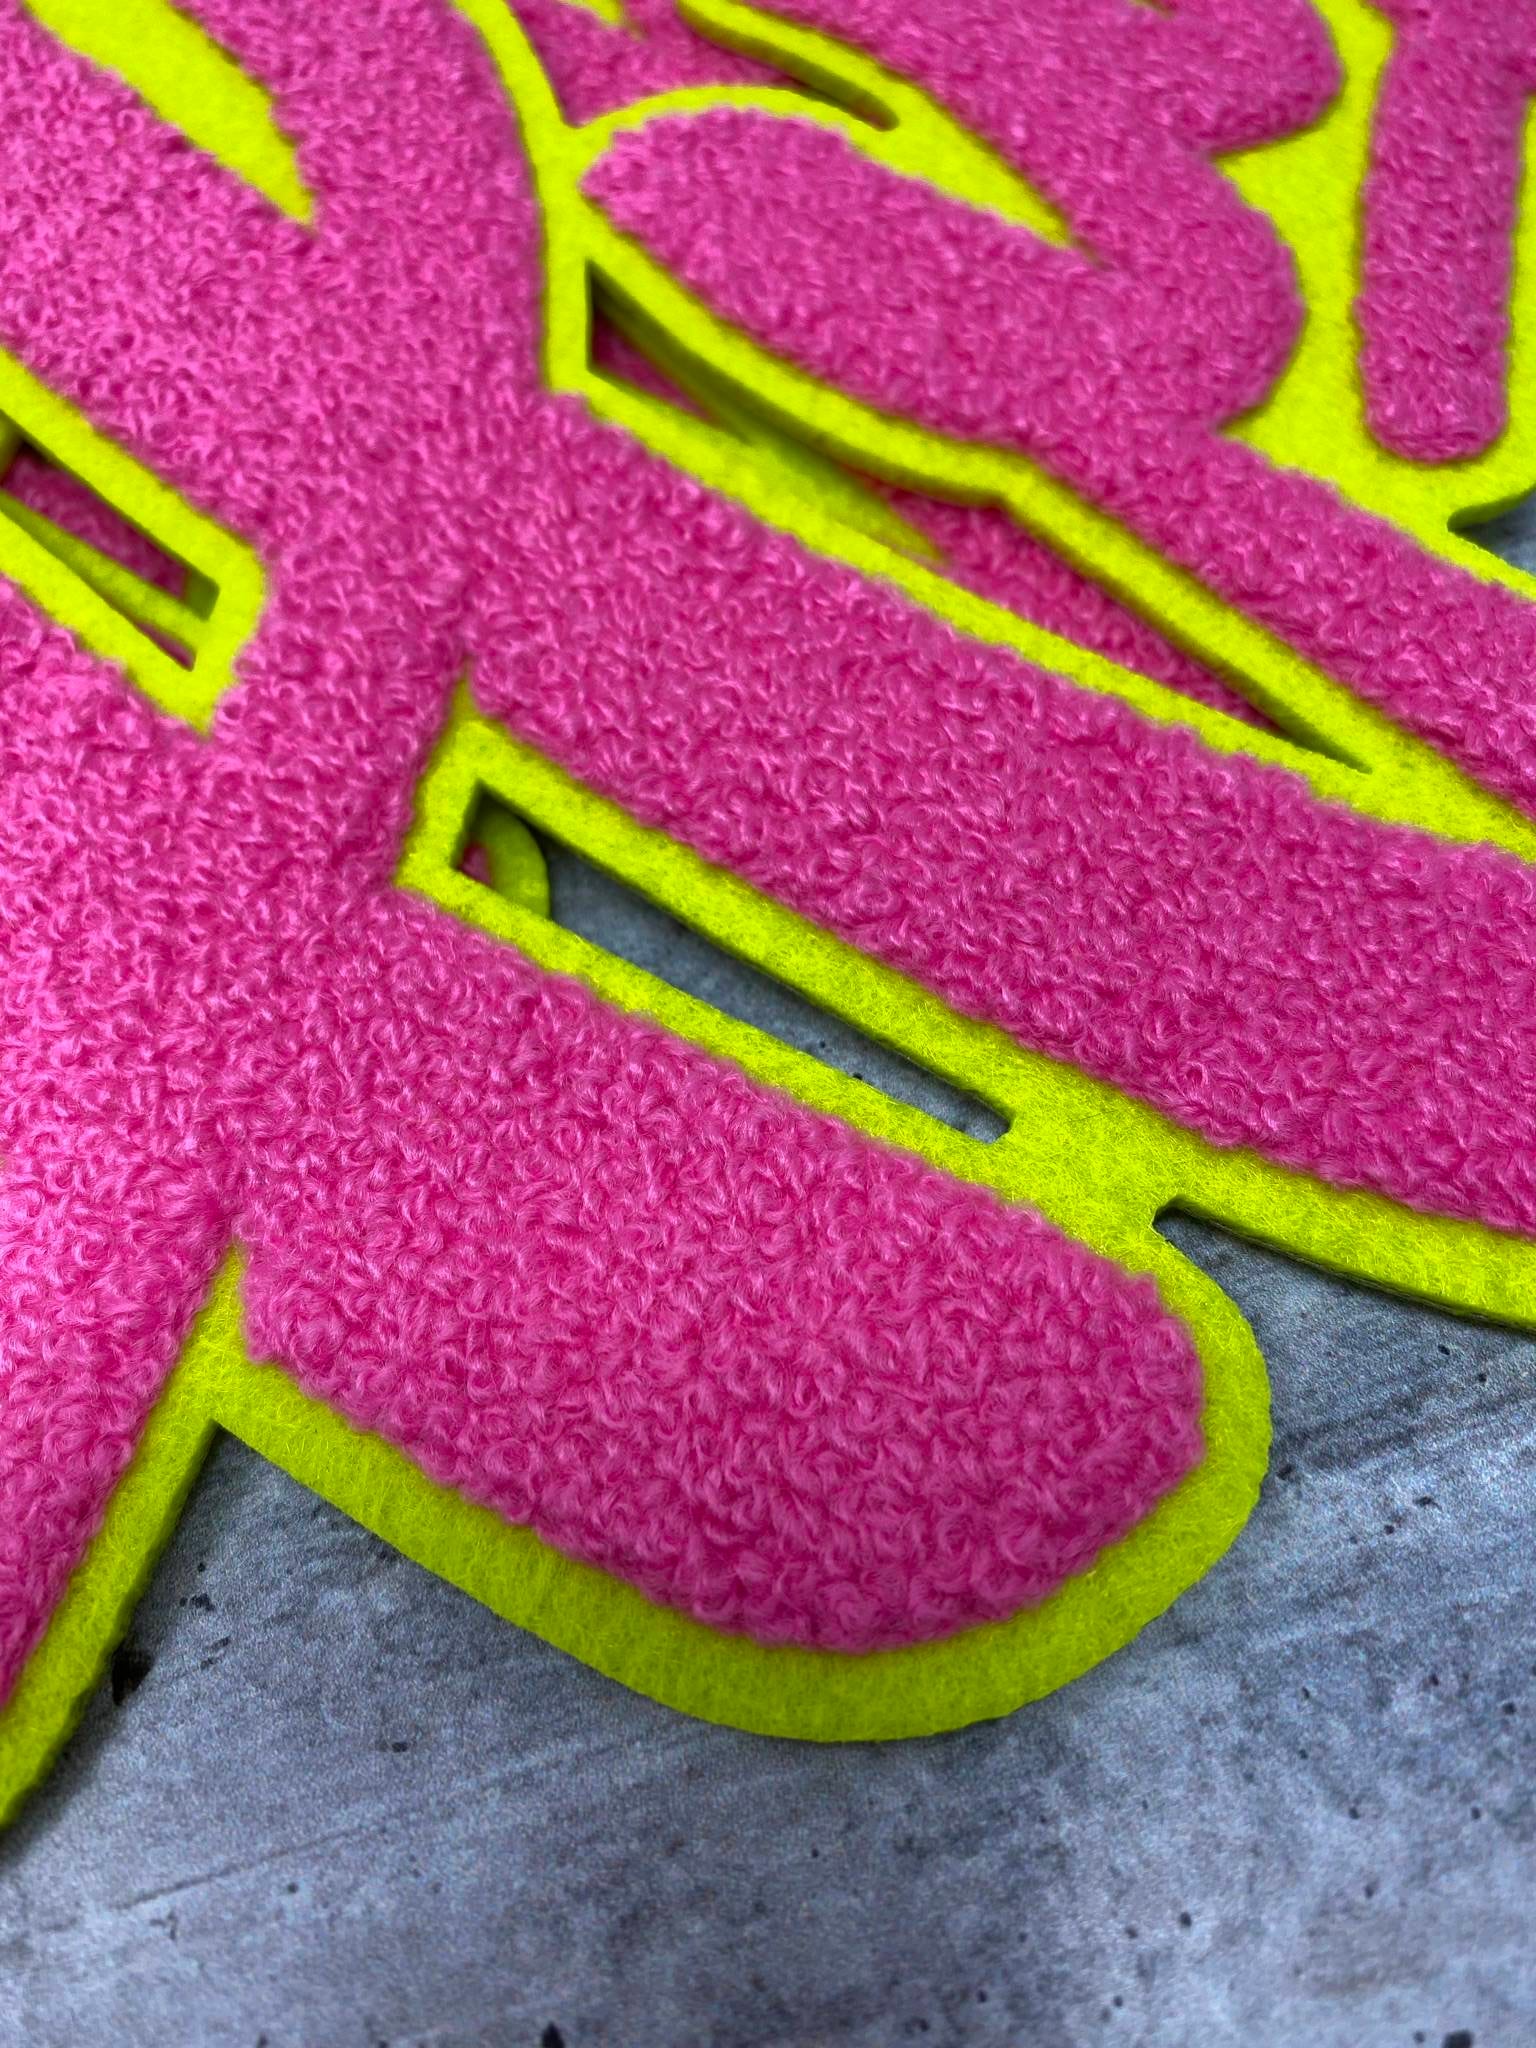 Exclusive, HOTT Pink & Green "Hustle" Chenille Patch (iron-on) Size 10"x8", Varsity Patch for Denim Jacket, Shirts and Hoodies, Large Patch